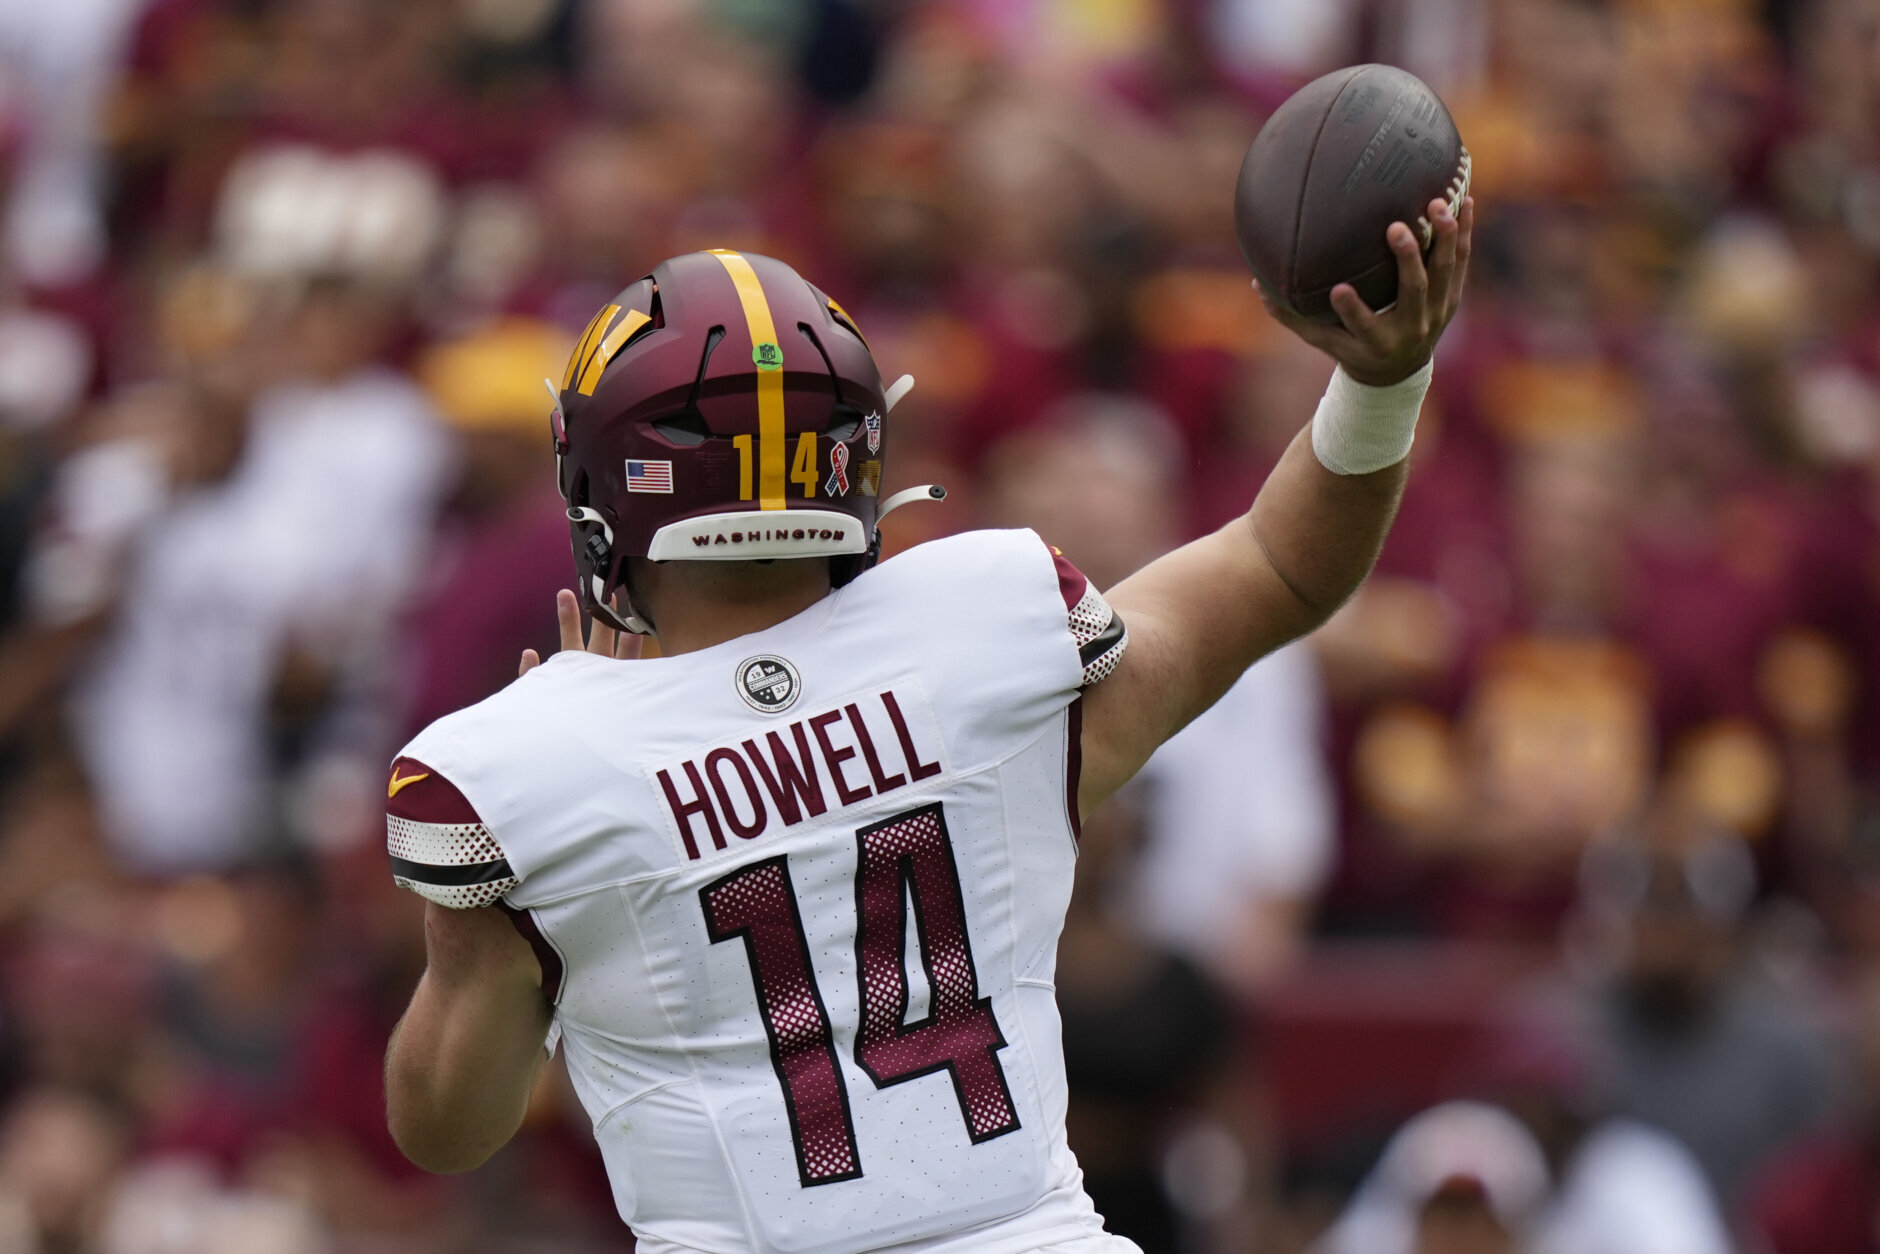 Washington Commanders quarterback Sam Howell (14) throws the ball during the first half of an NFL preseason football game against the Arizona Cardinals, Sunday, Sept. 10, 2023, in Landover, Md. (AP Photo/Alex Brandon)